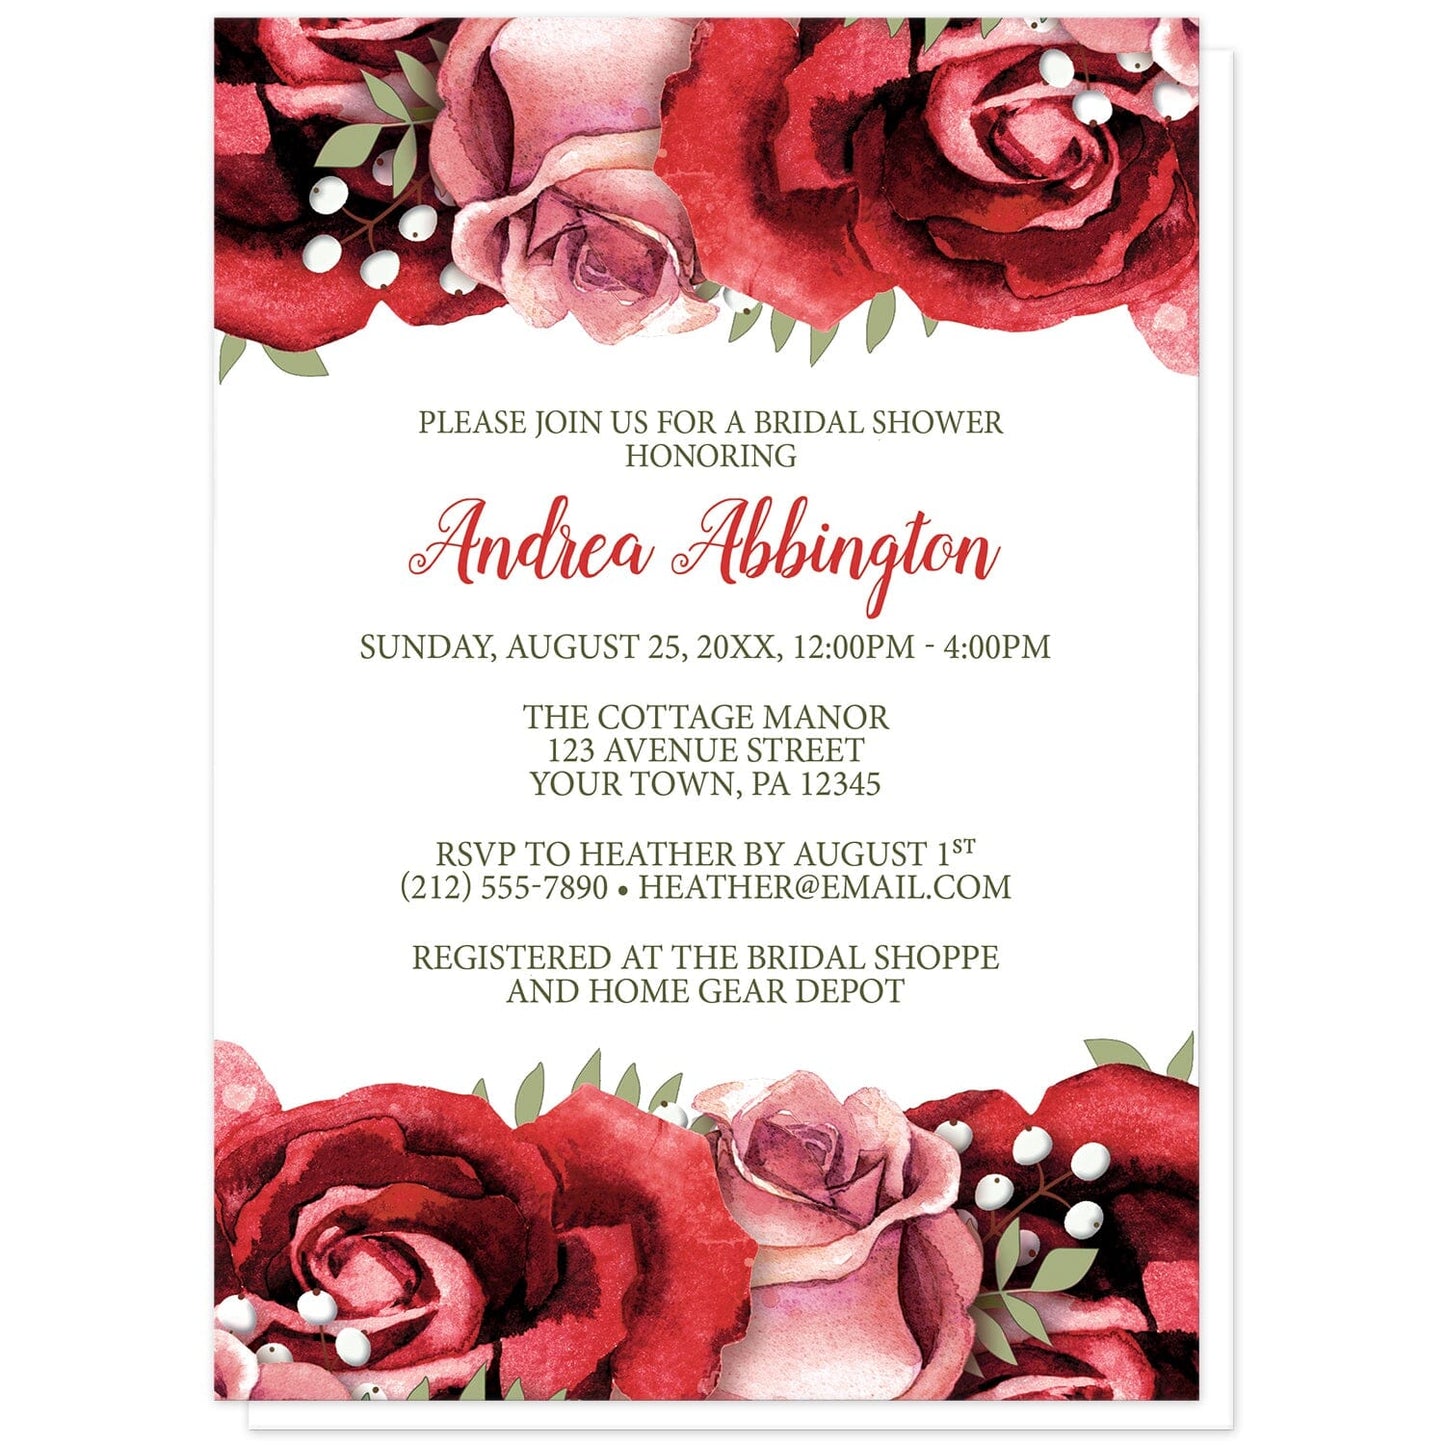 Rustic Red Pink Rose Green White Bridal Shower Invitations at Artistically Invited. Rustic red pink rose green white bridal shower invitations designed with beautiful red and pink roses along the top and the bottom. Your personalized bridal shower celebration details are custom printed in red and green over a white background in the center between the roses.